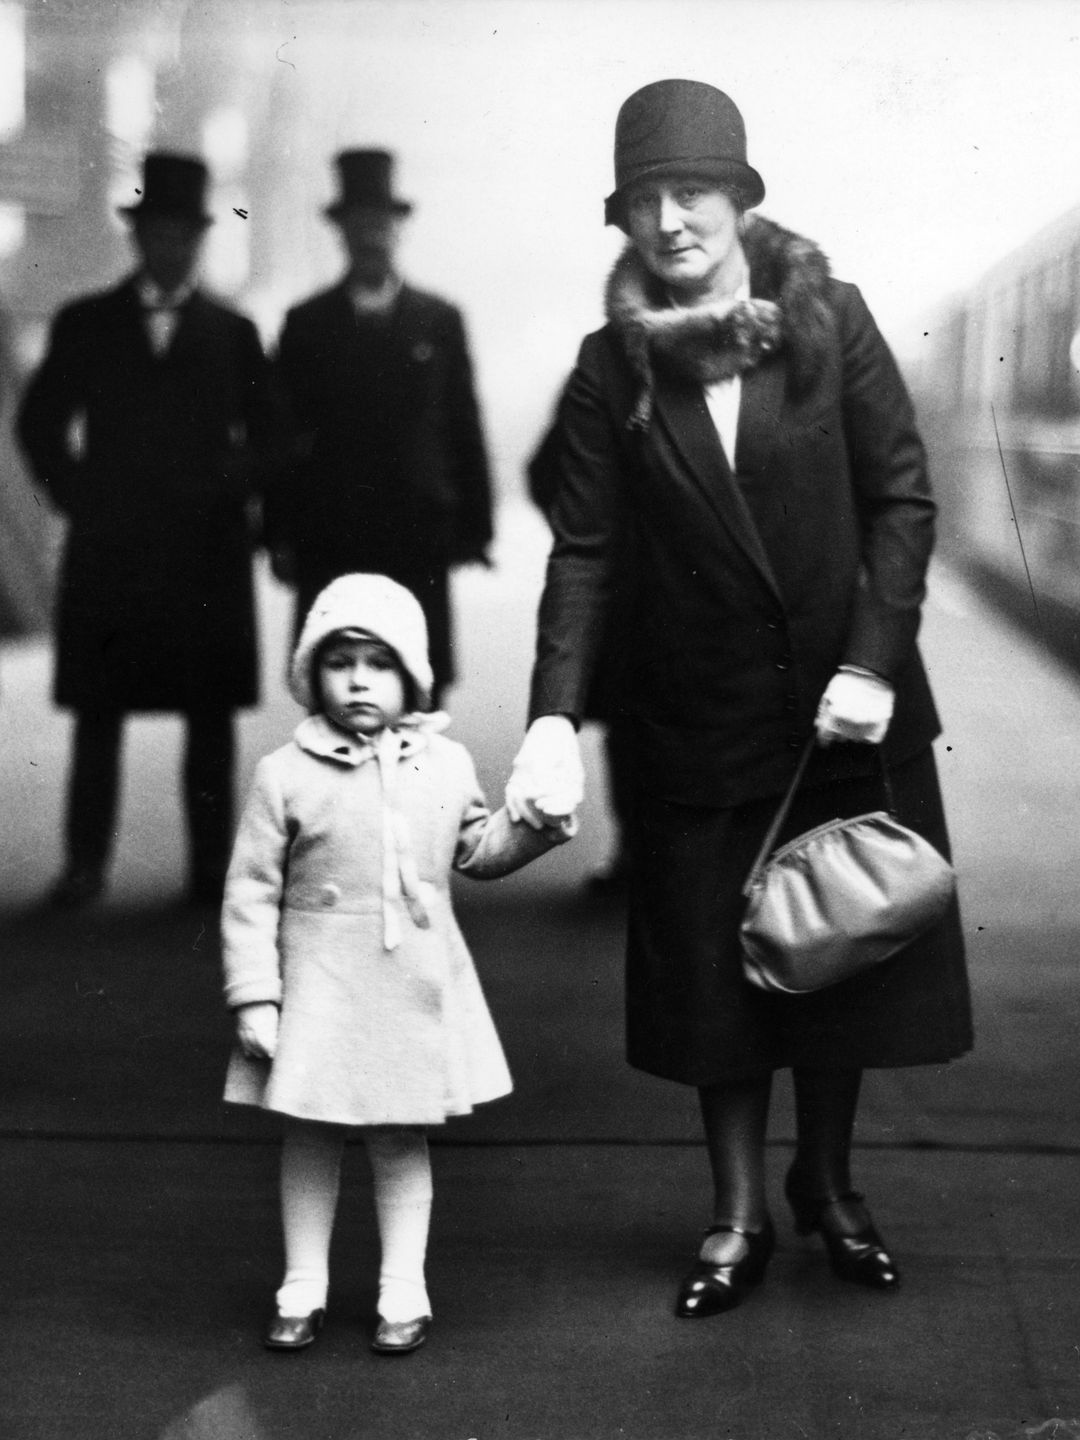 A young Queen Elizabeth holding the hand of a woman at a train station